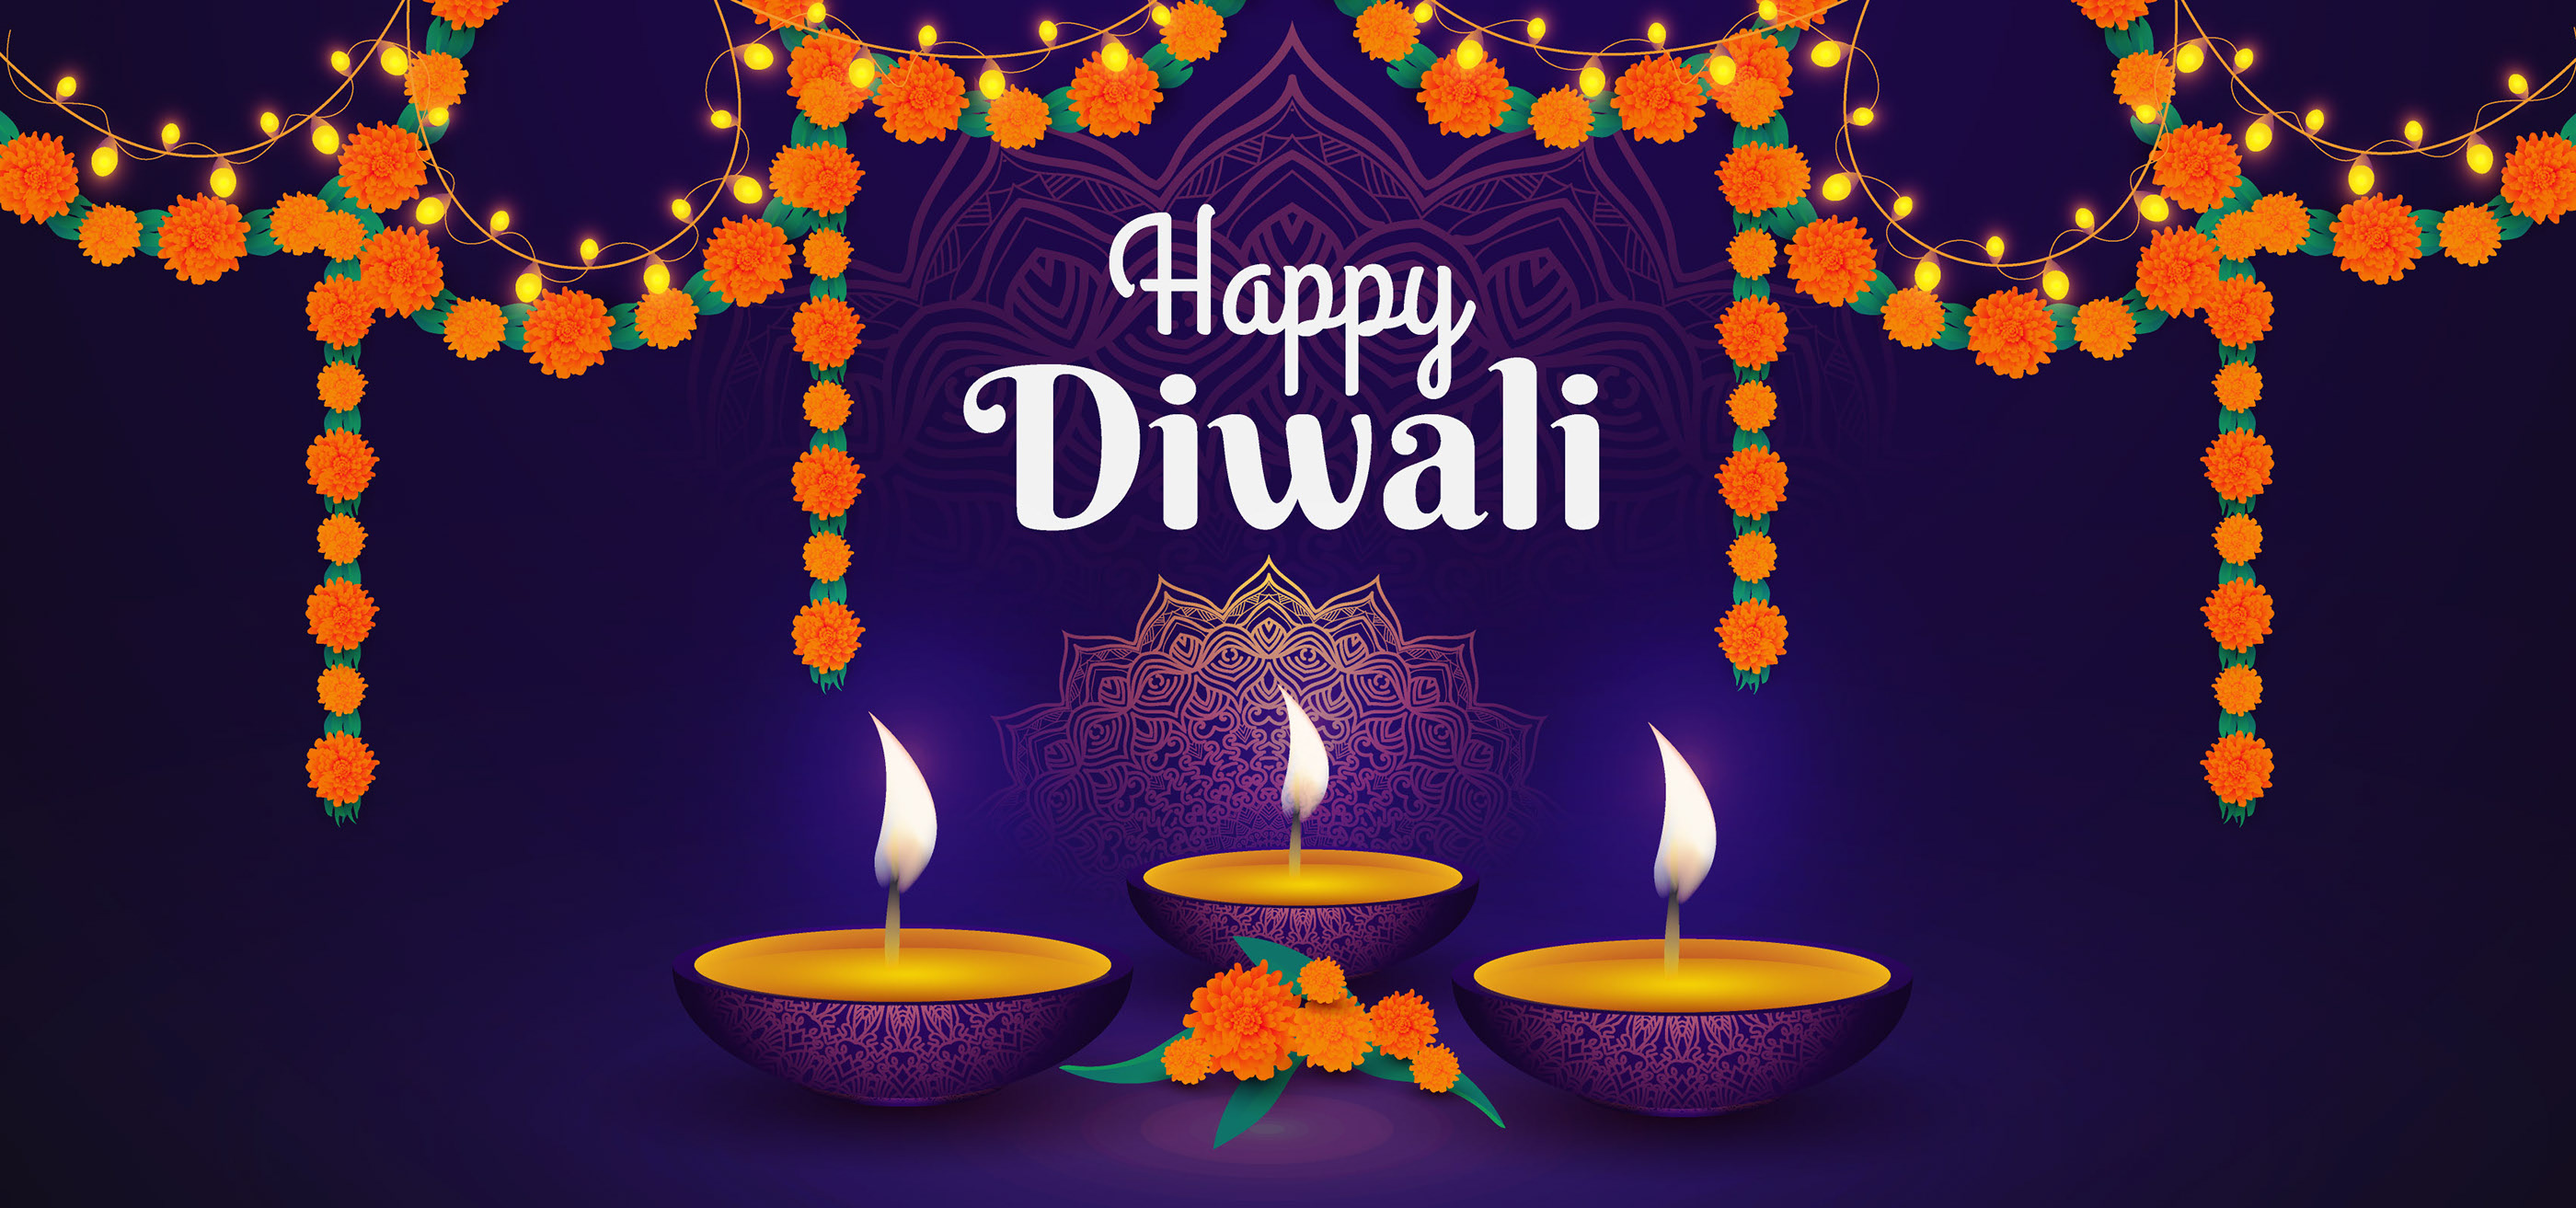 70938 Diwali Background Stock Photos and Images  123RF